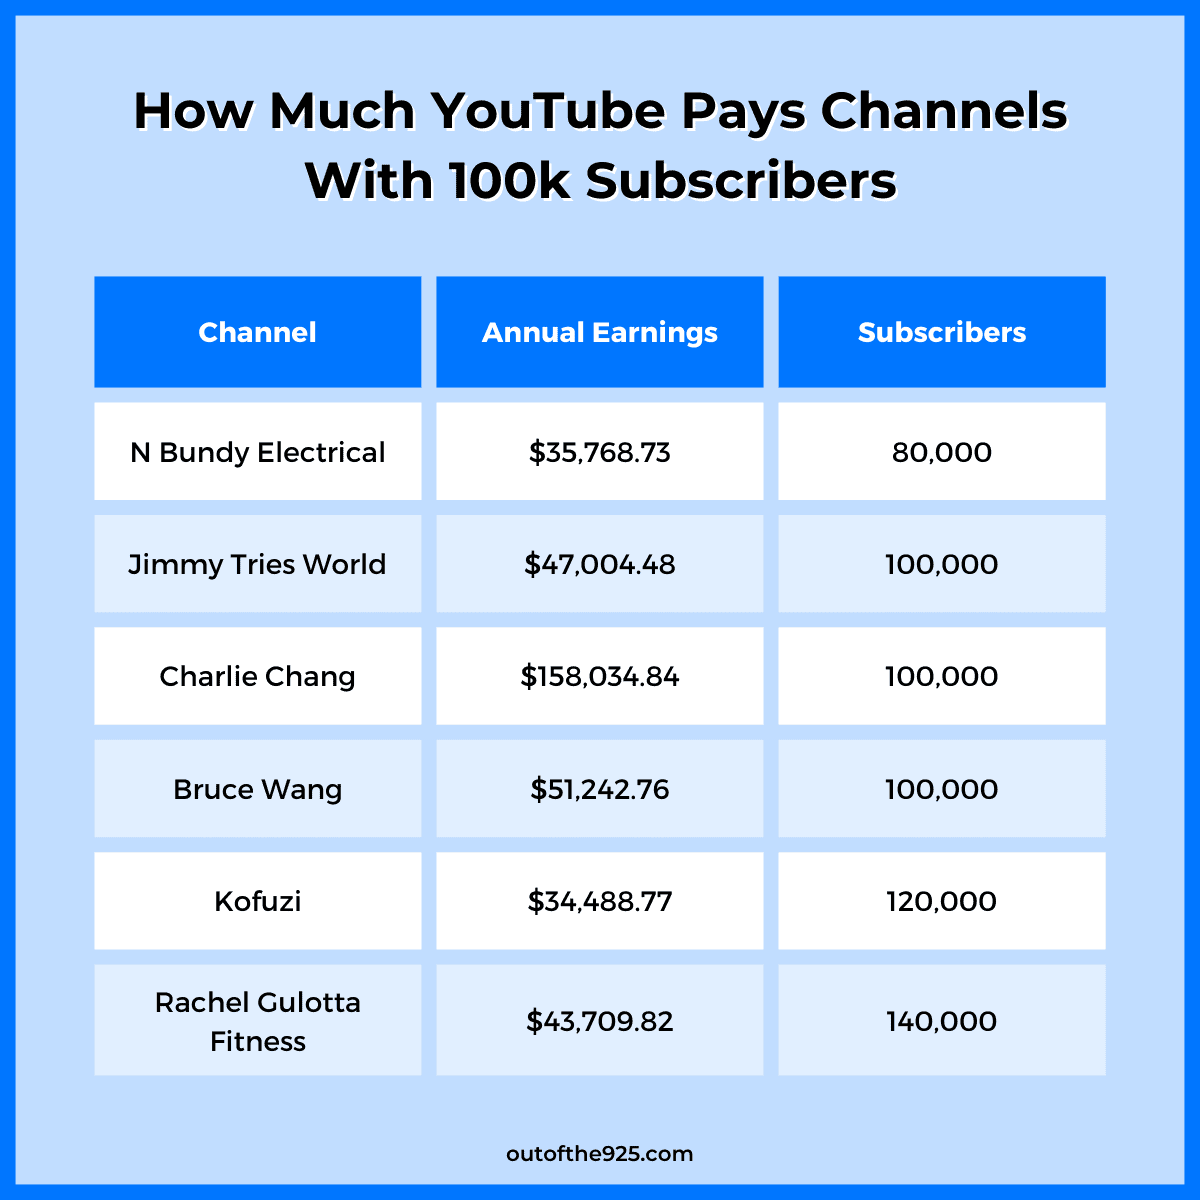 How Much YouTube Pays Channels With 100k Subscribers